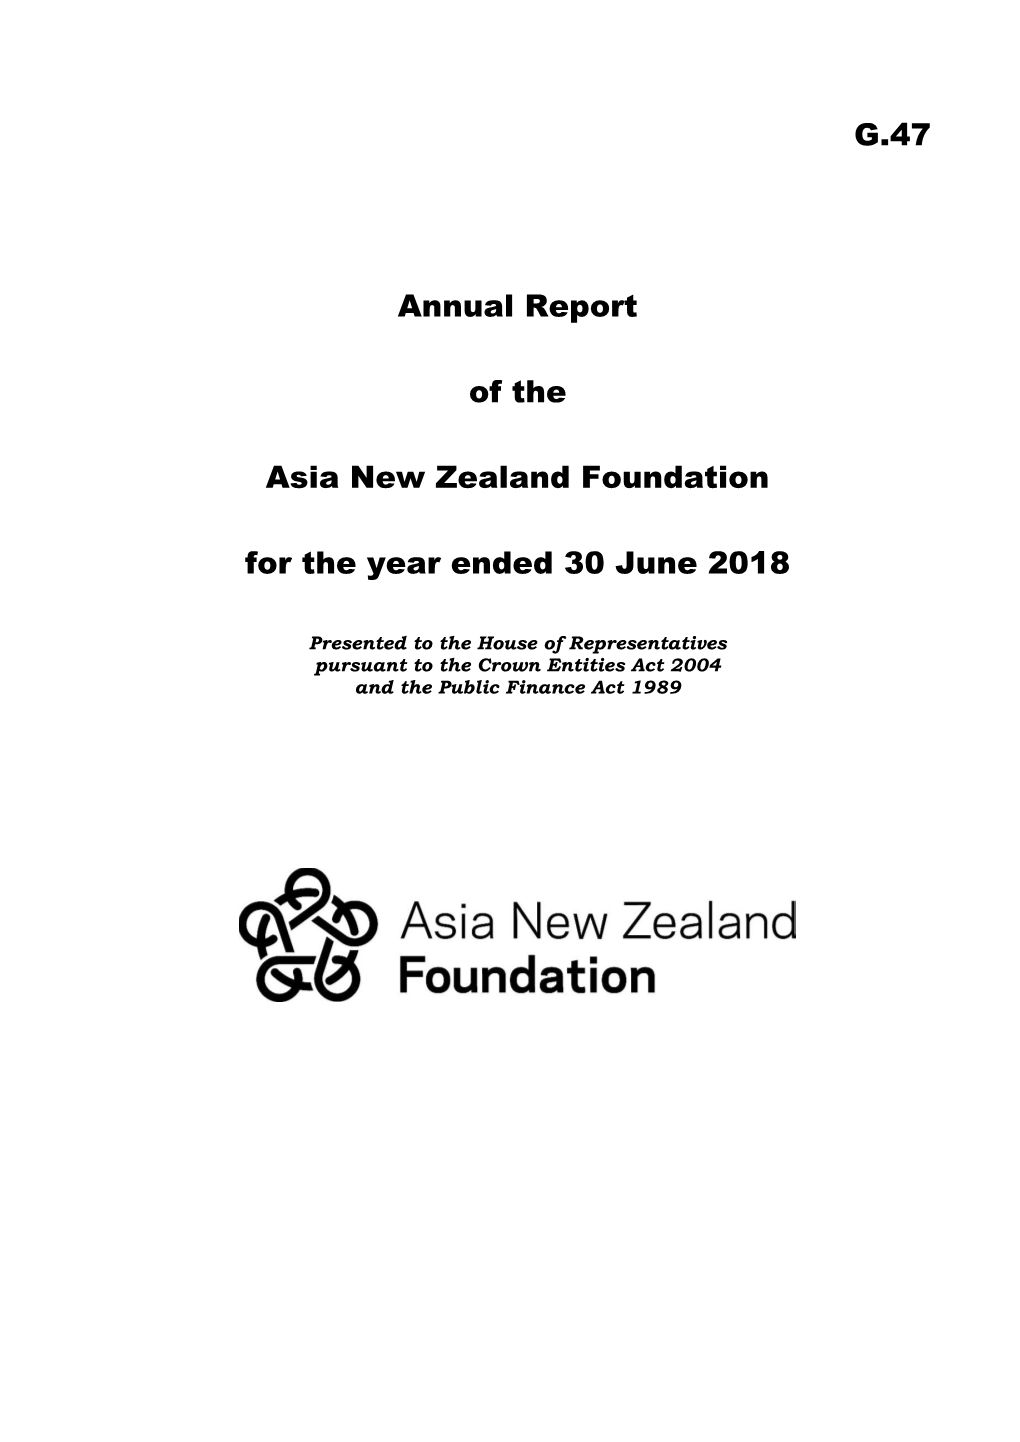 G.47 Annual Report of the Asia New Zealand Foundation for the Year